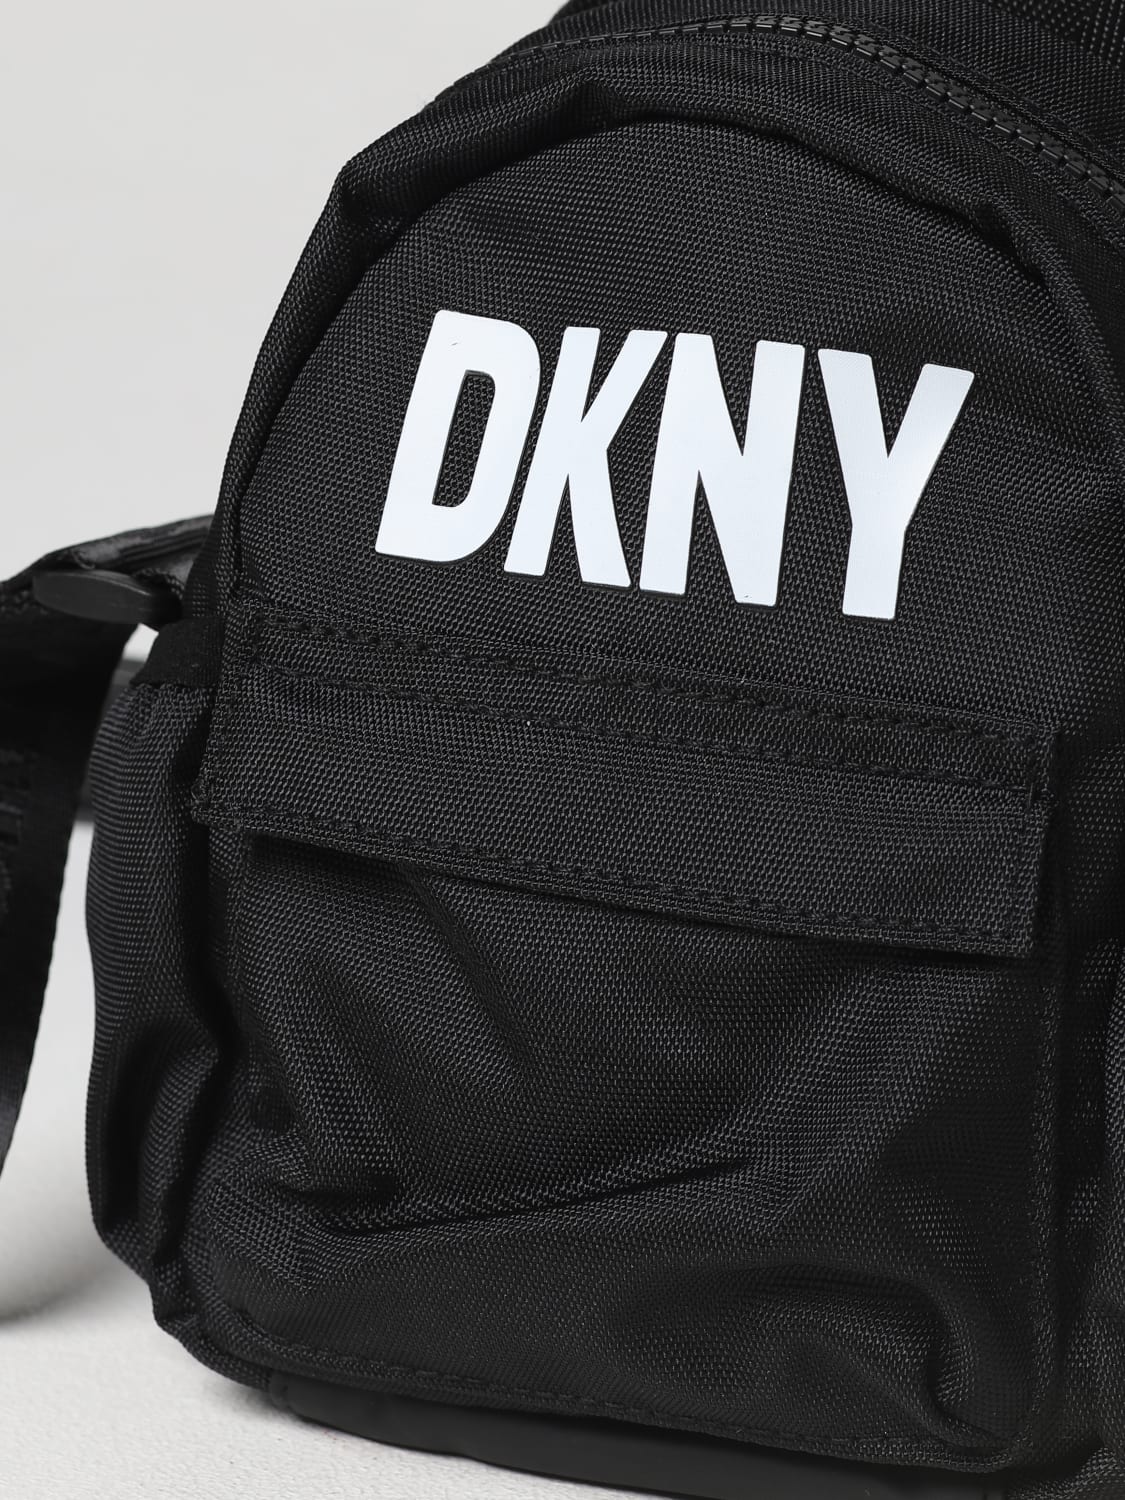 Dkny Bags Black Friday Sale Store UK